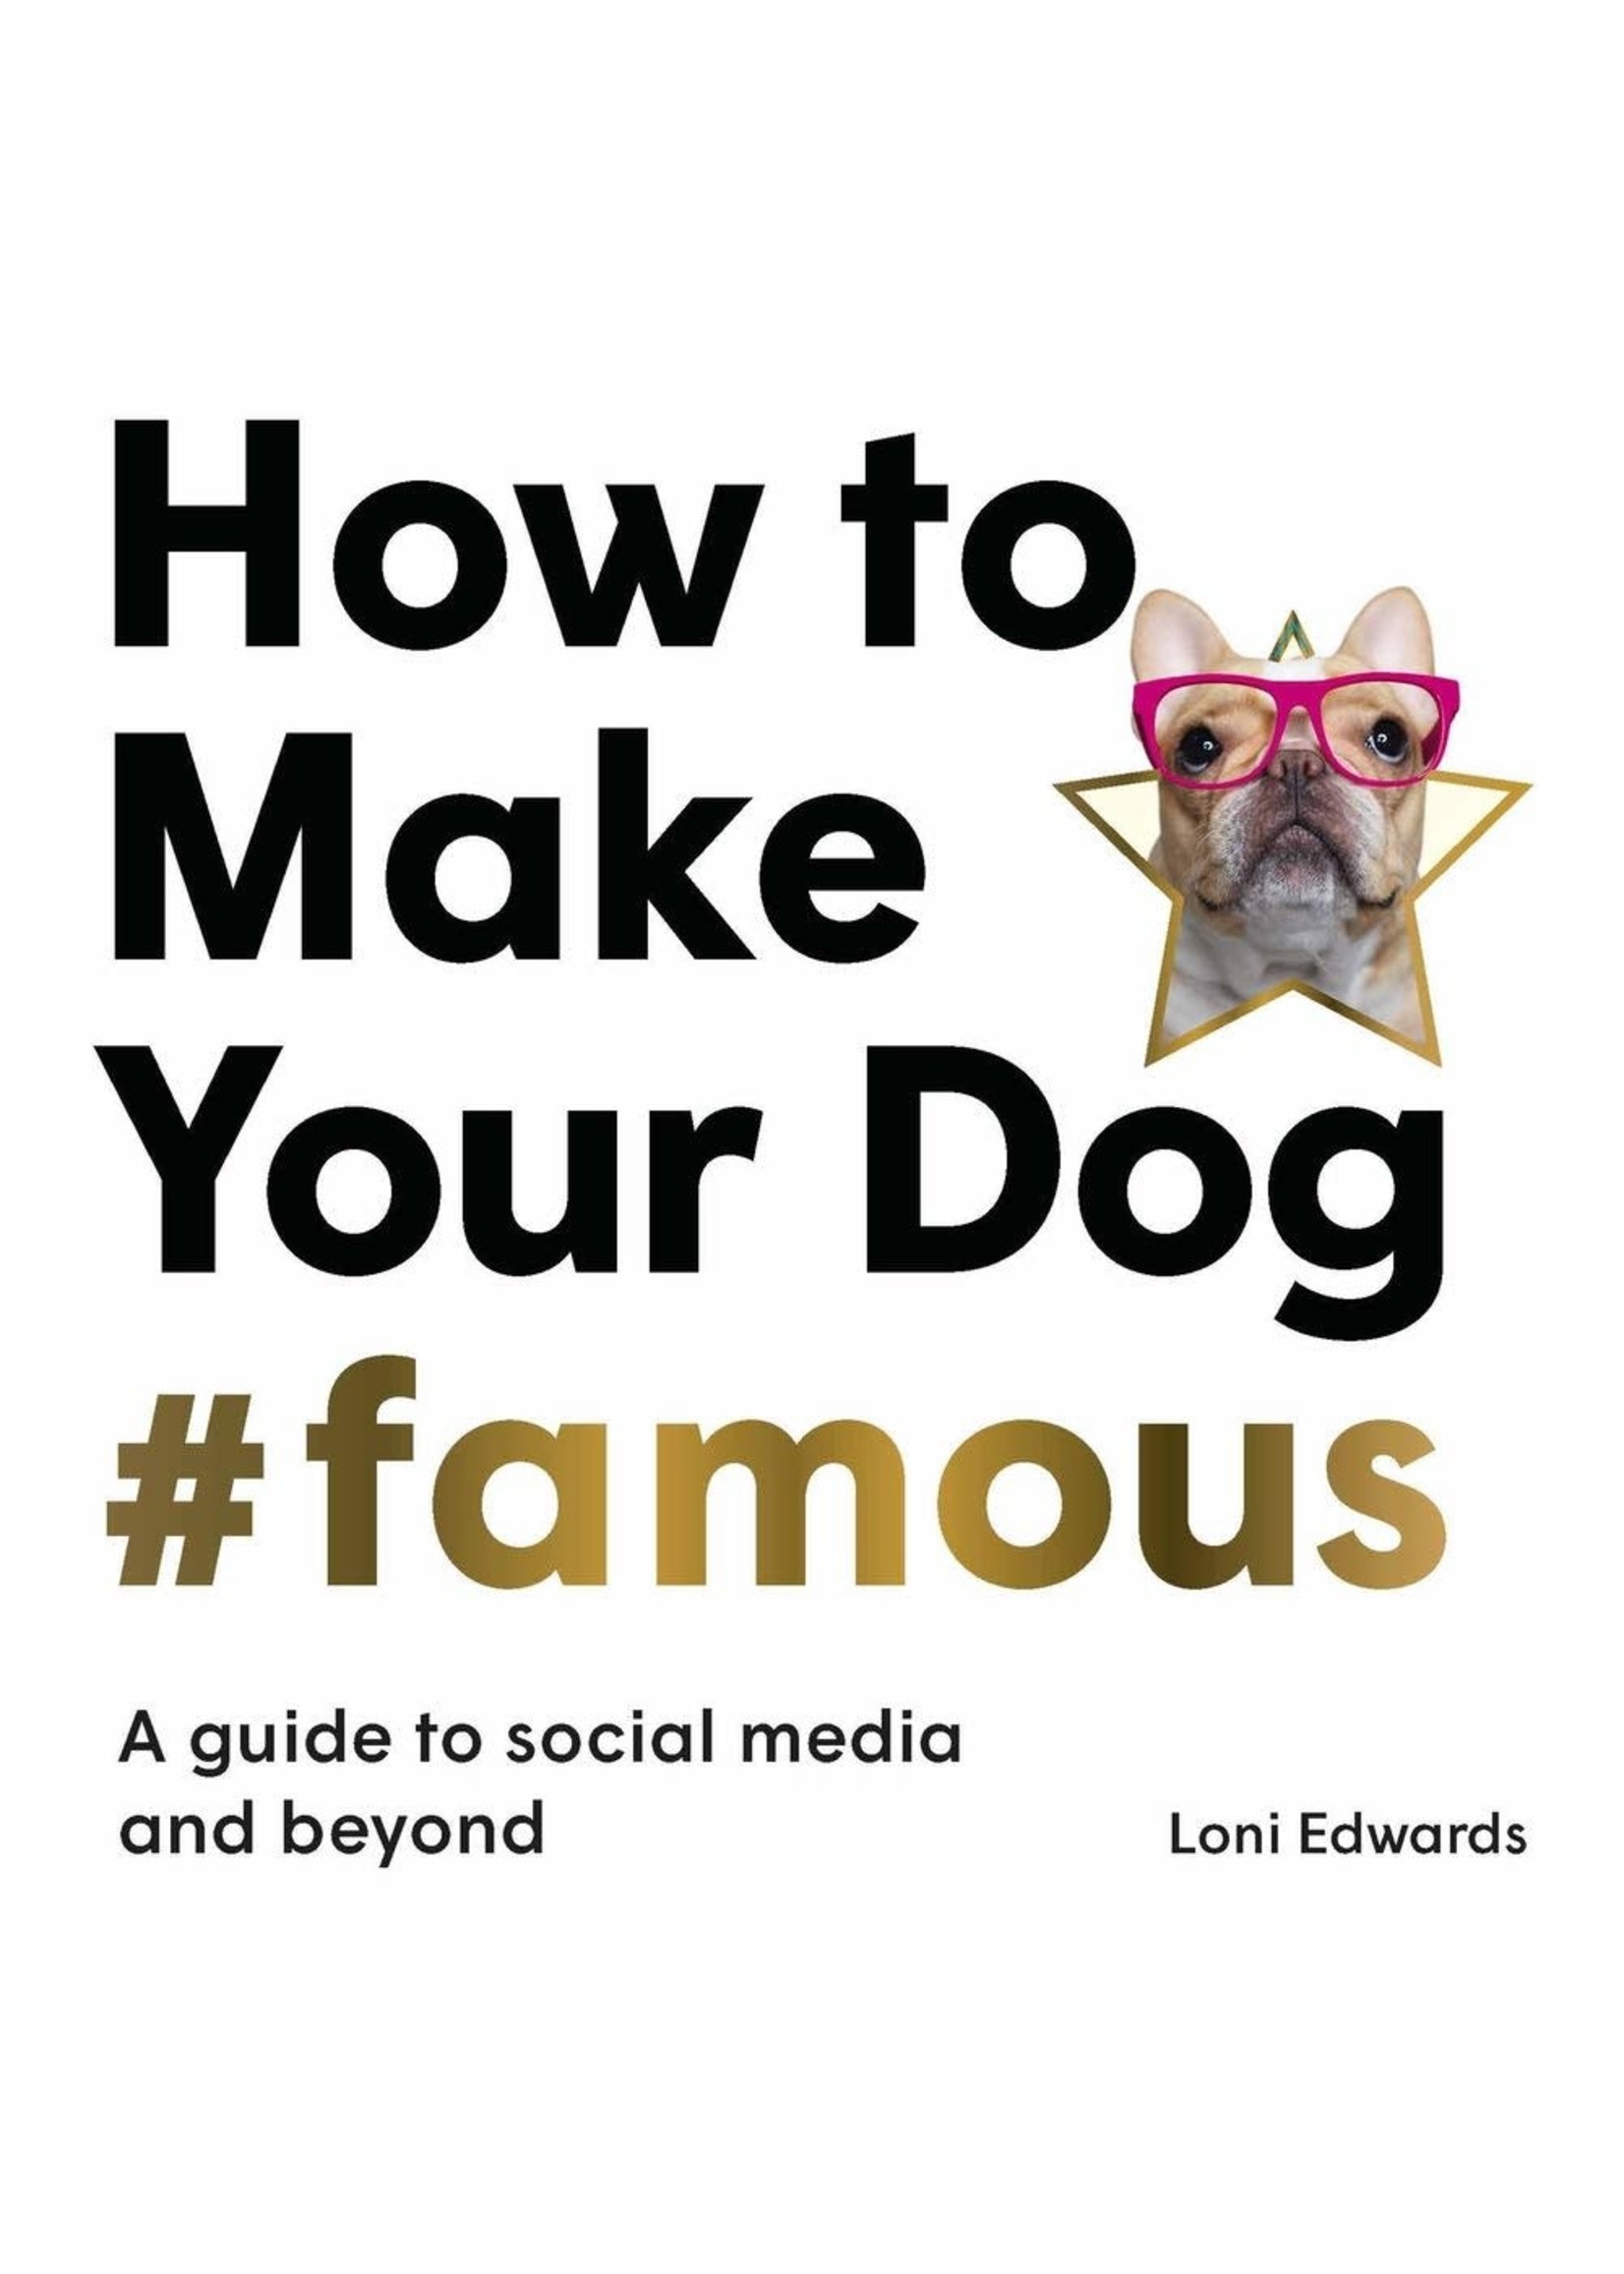 PENGUIN RANDOM HOUSE HOW TO MAKE YOUR DOG #FAMOUS